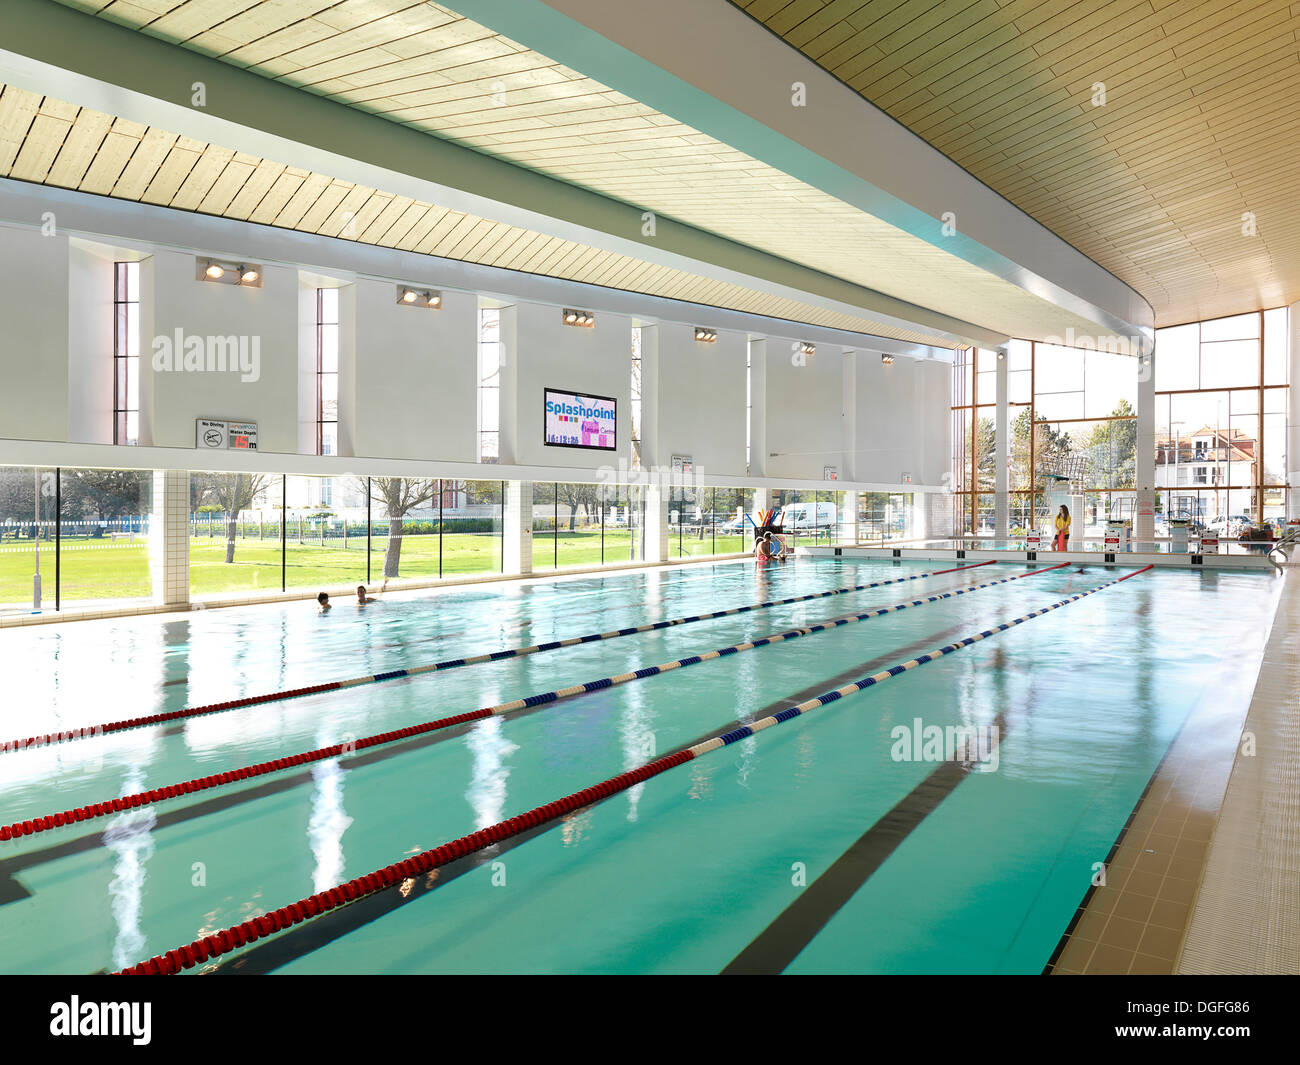 Splashpoint Leisure Centre, Worthing, United Kingdom. Architect: Wilkinson Eyre Architects, 2013. Internal view of main pool and Stock Photo